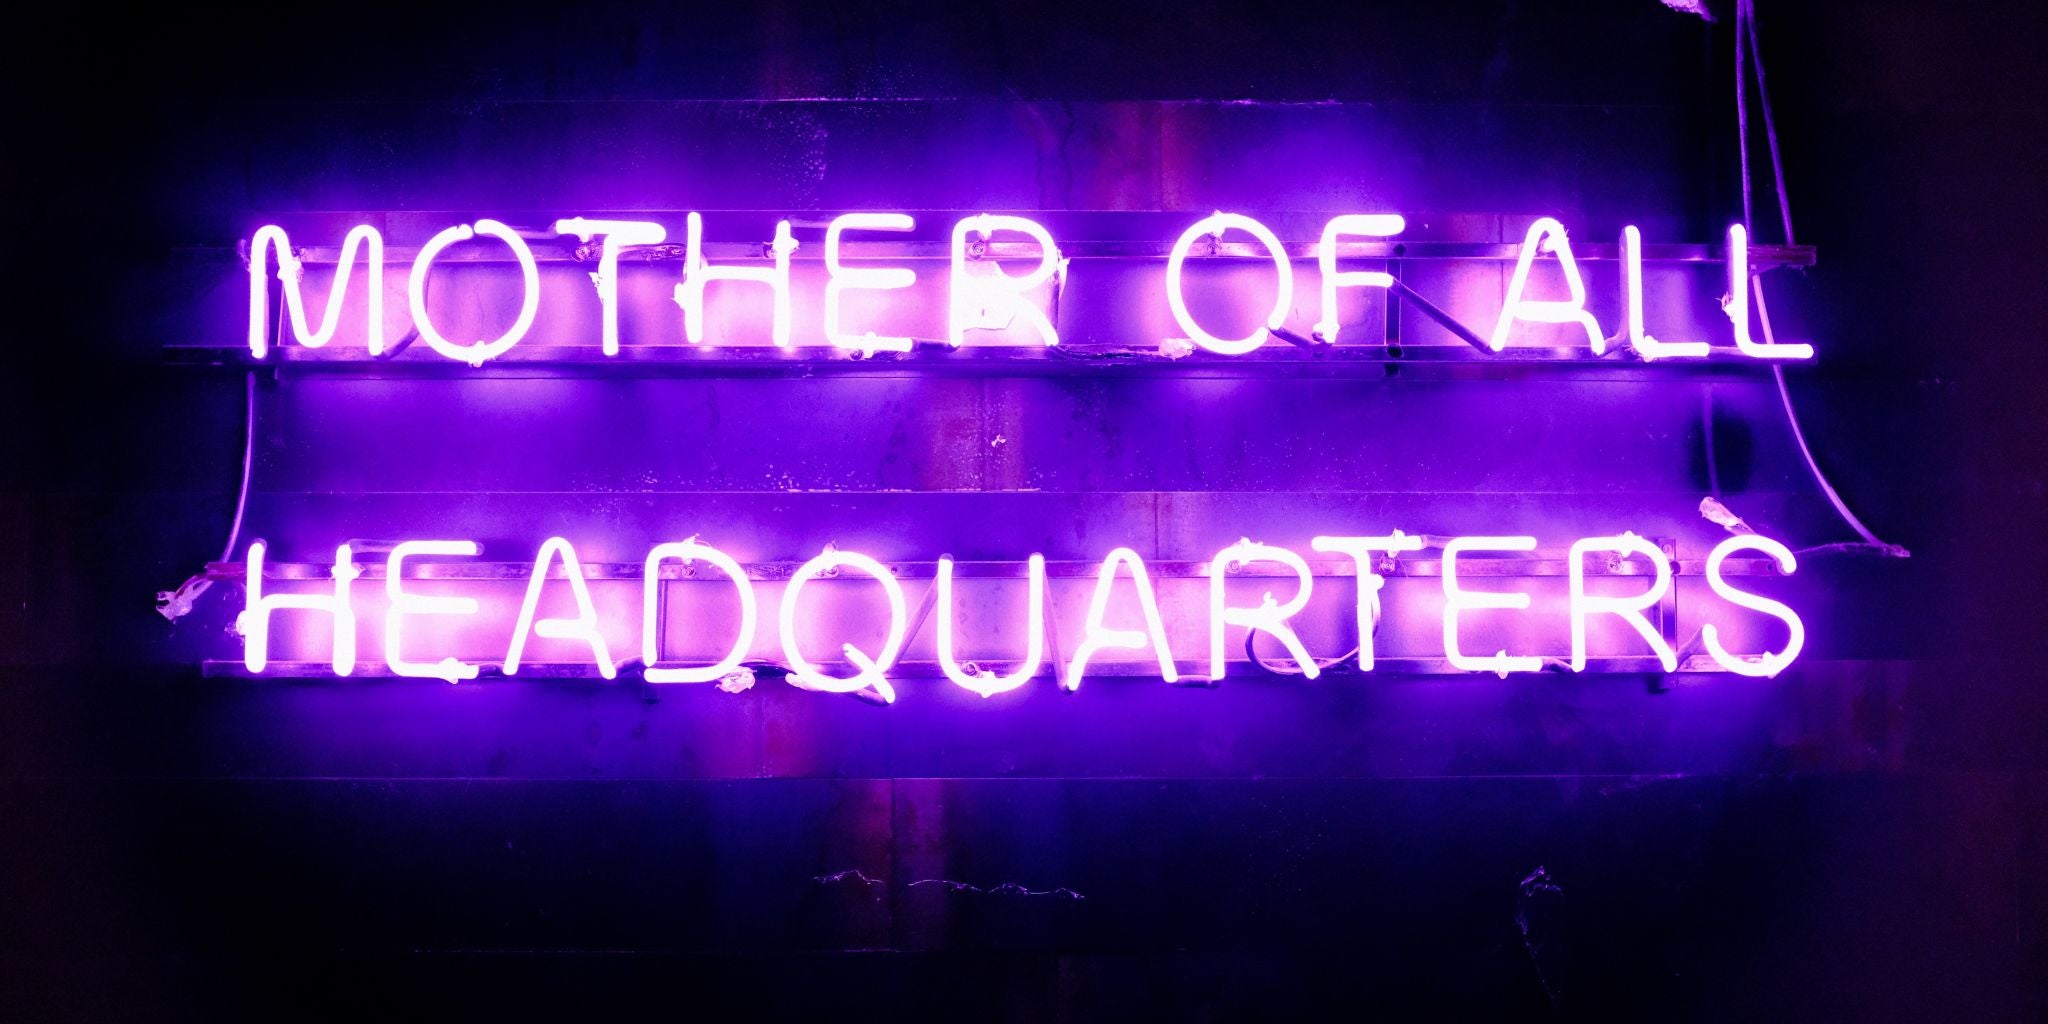 Neon sign in purple saying mother of all head quarters